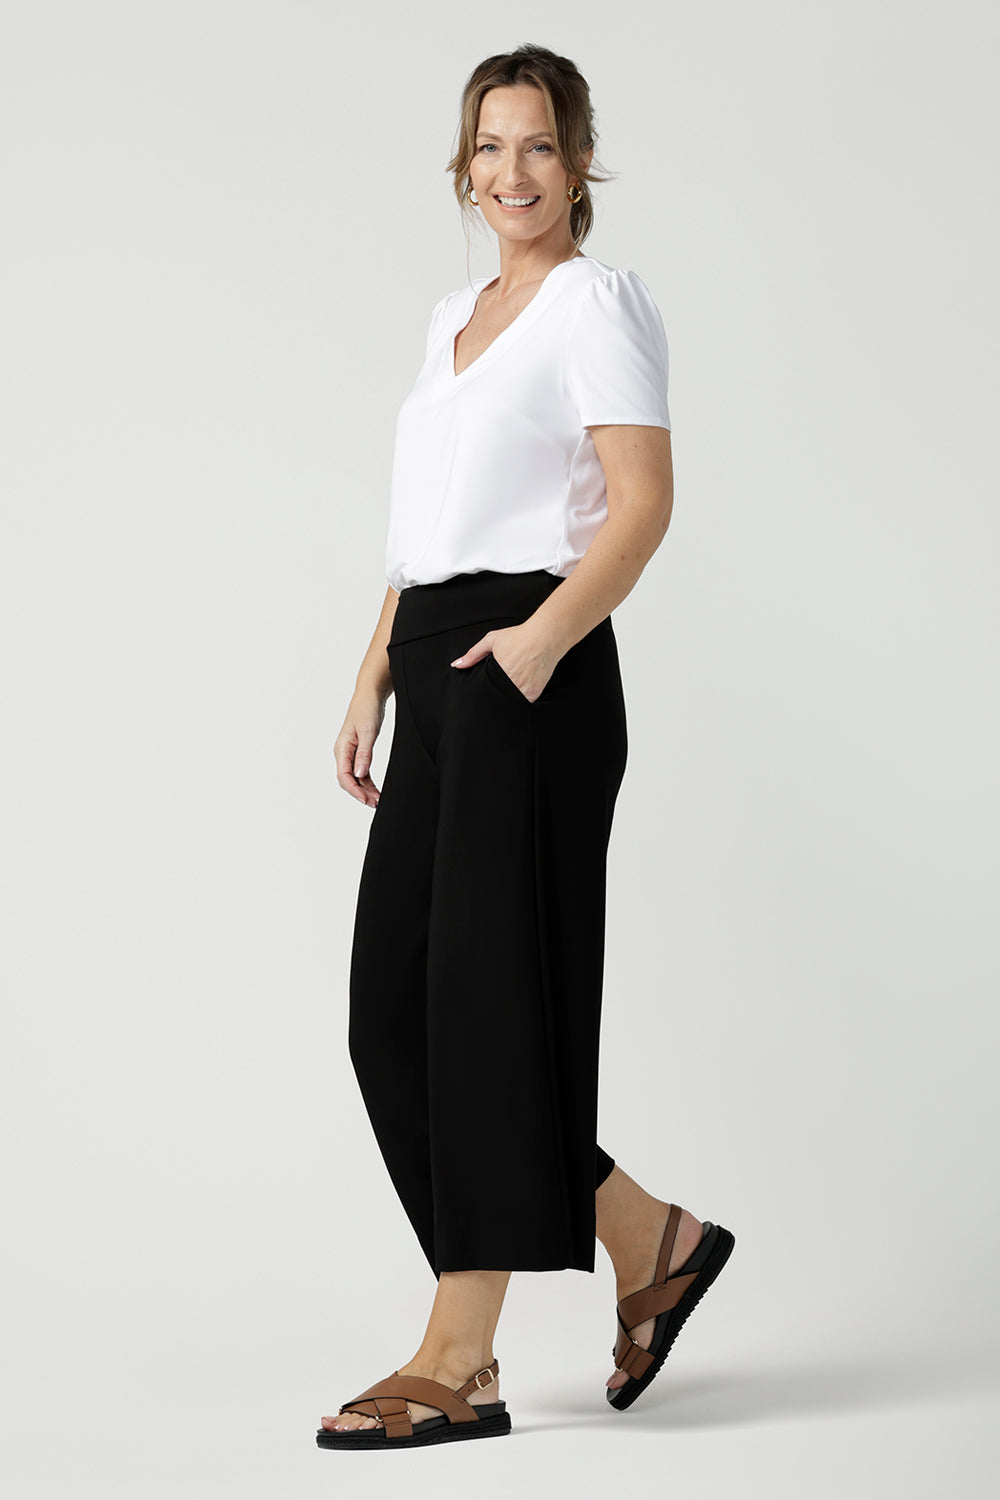 Side view of comfortable, wide leg black culotte pants worn with a V-neck white bamboo jersey top with short sleeves.. Cropped pants with pockets, these pull-on trousers are made in Australia by women's clothing brand, Leina & Fleur - size inclusive, shop online in petite, mid size and plus sizes.